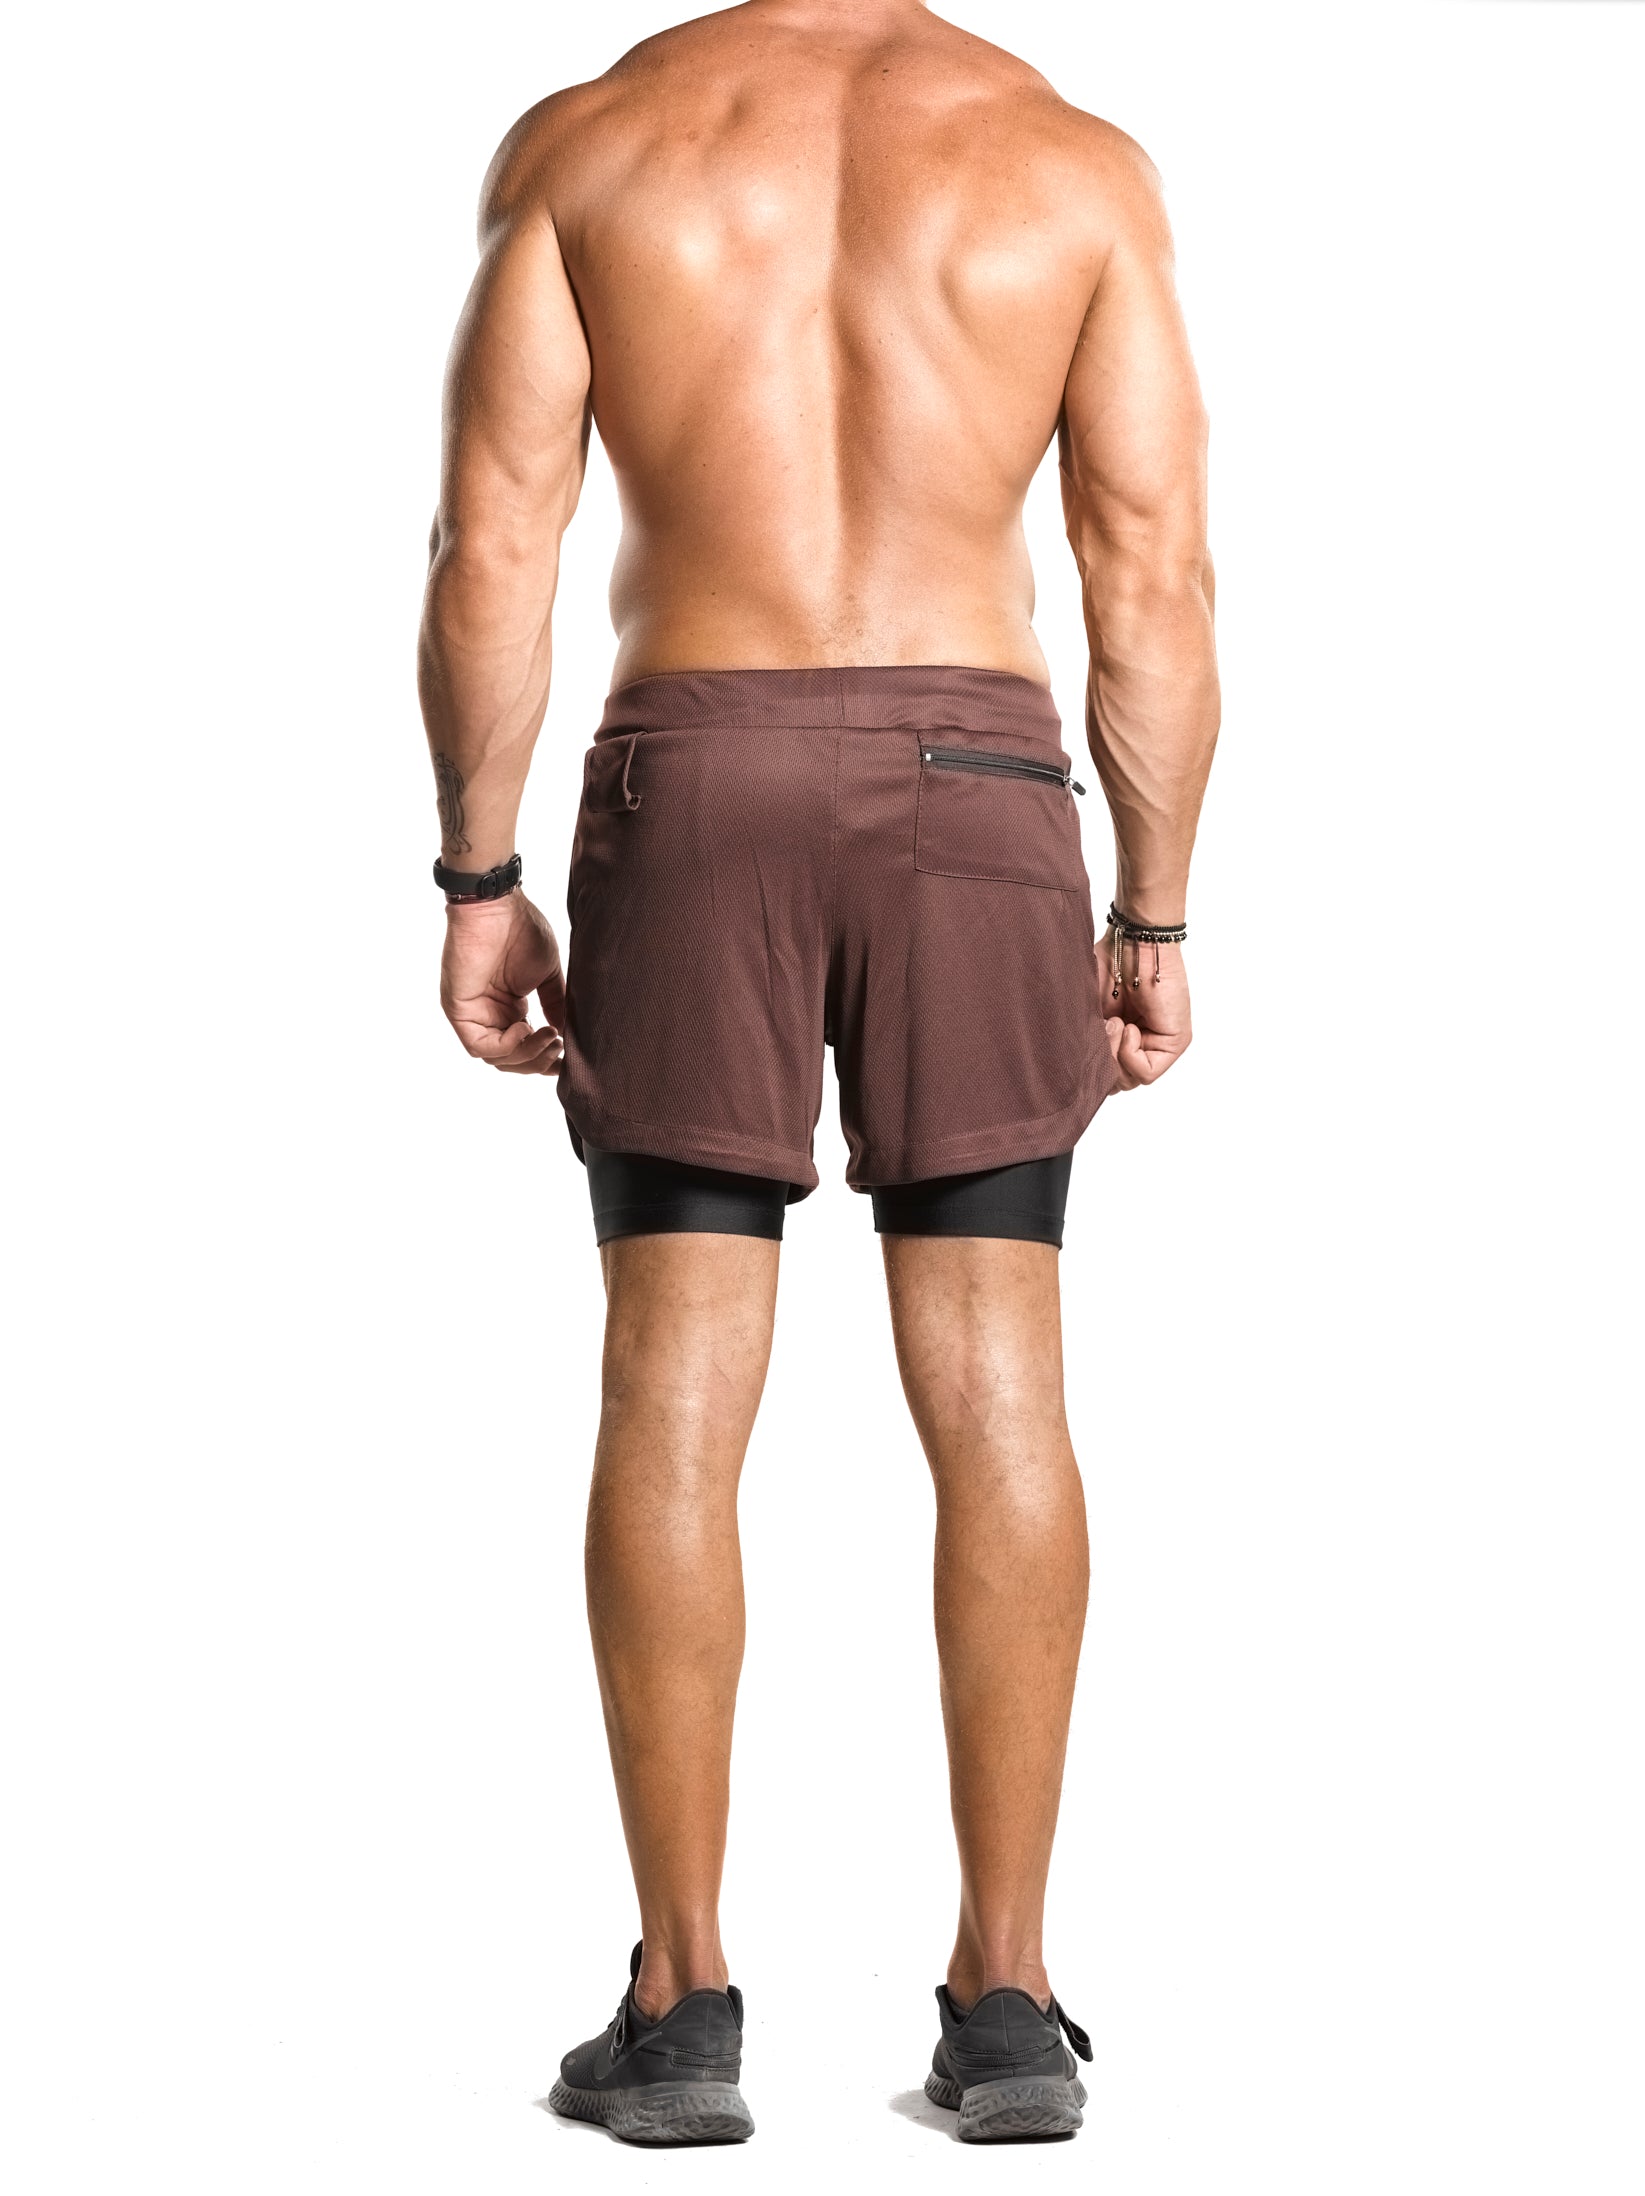 2 in 1 Functional Training Shorts [Brown/Black] - Shorts - Gym Apparel Egypt